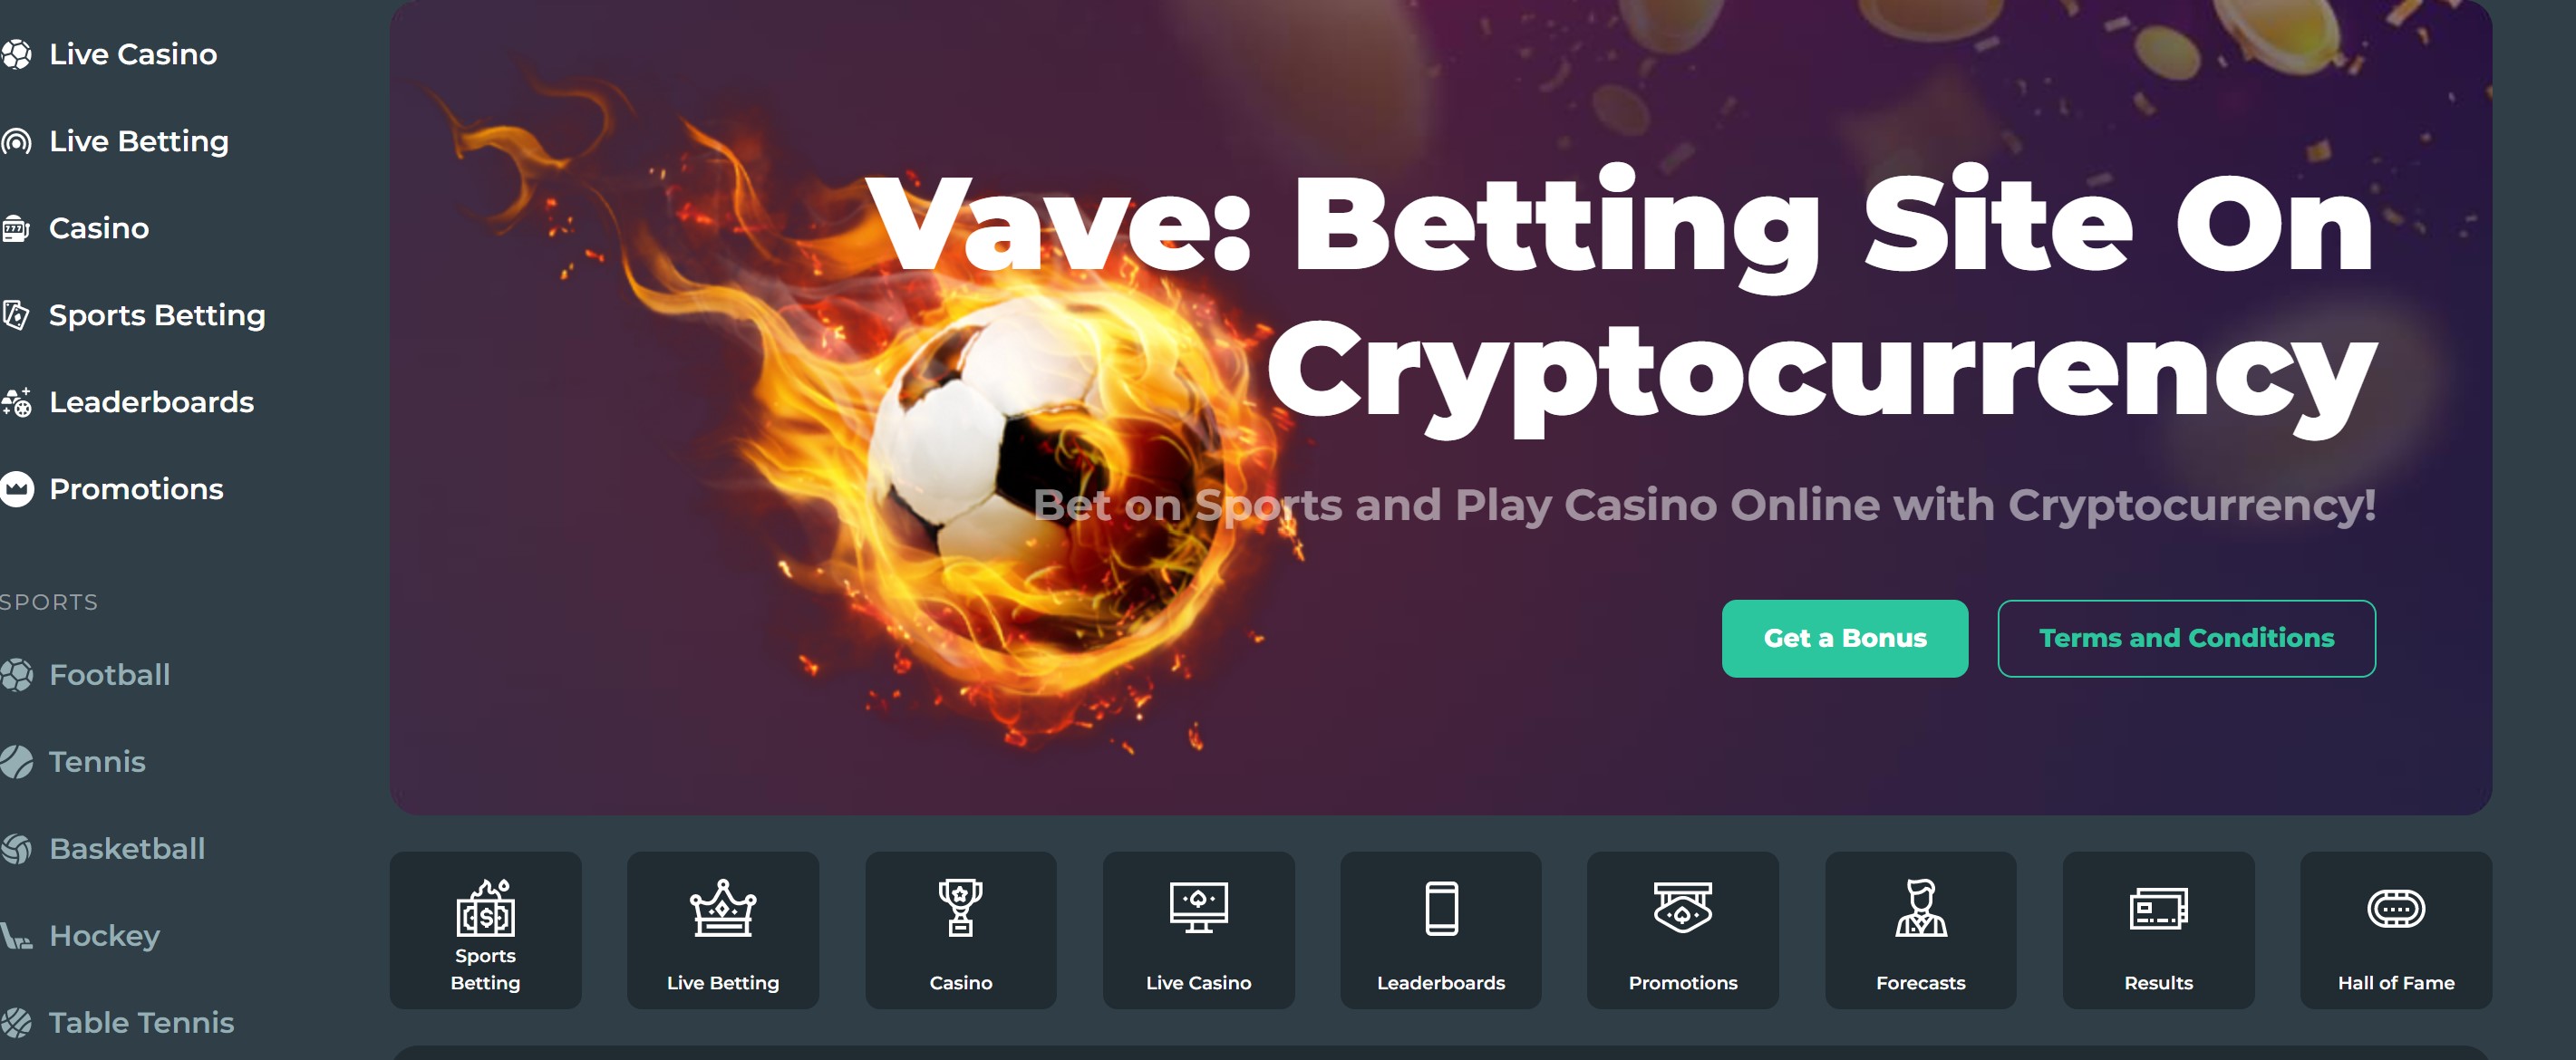 Cryptocurrency Betting On Vave Casino